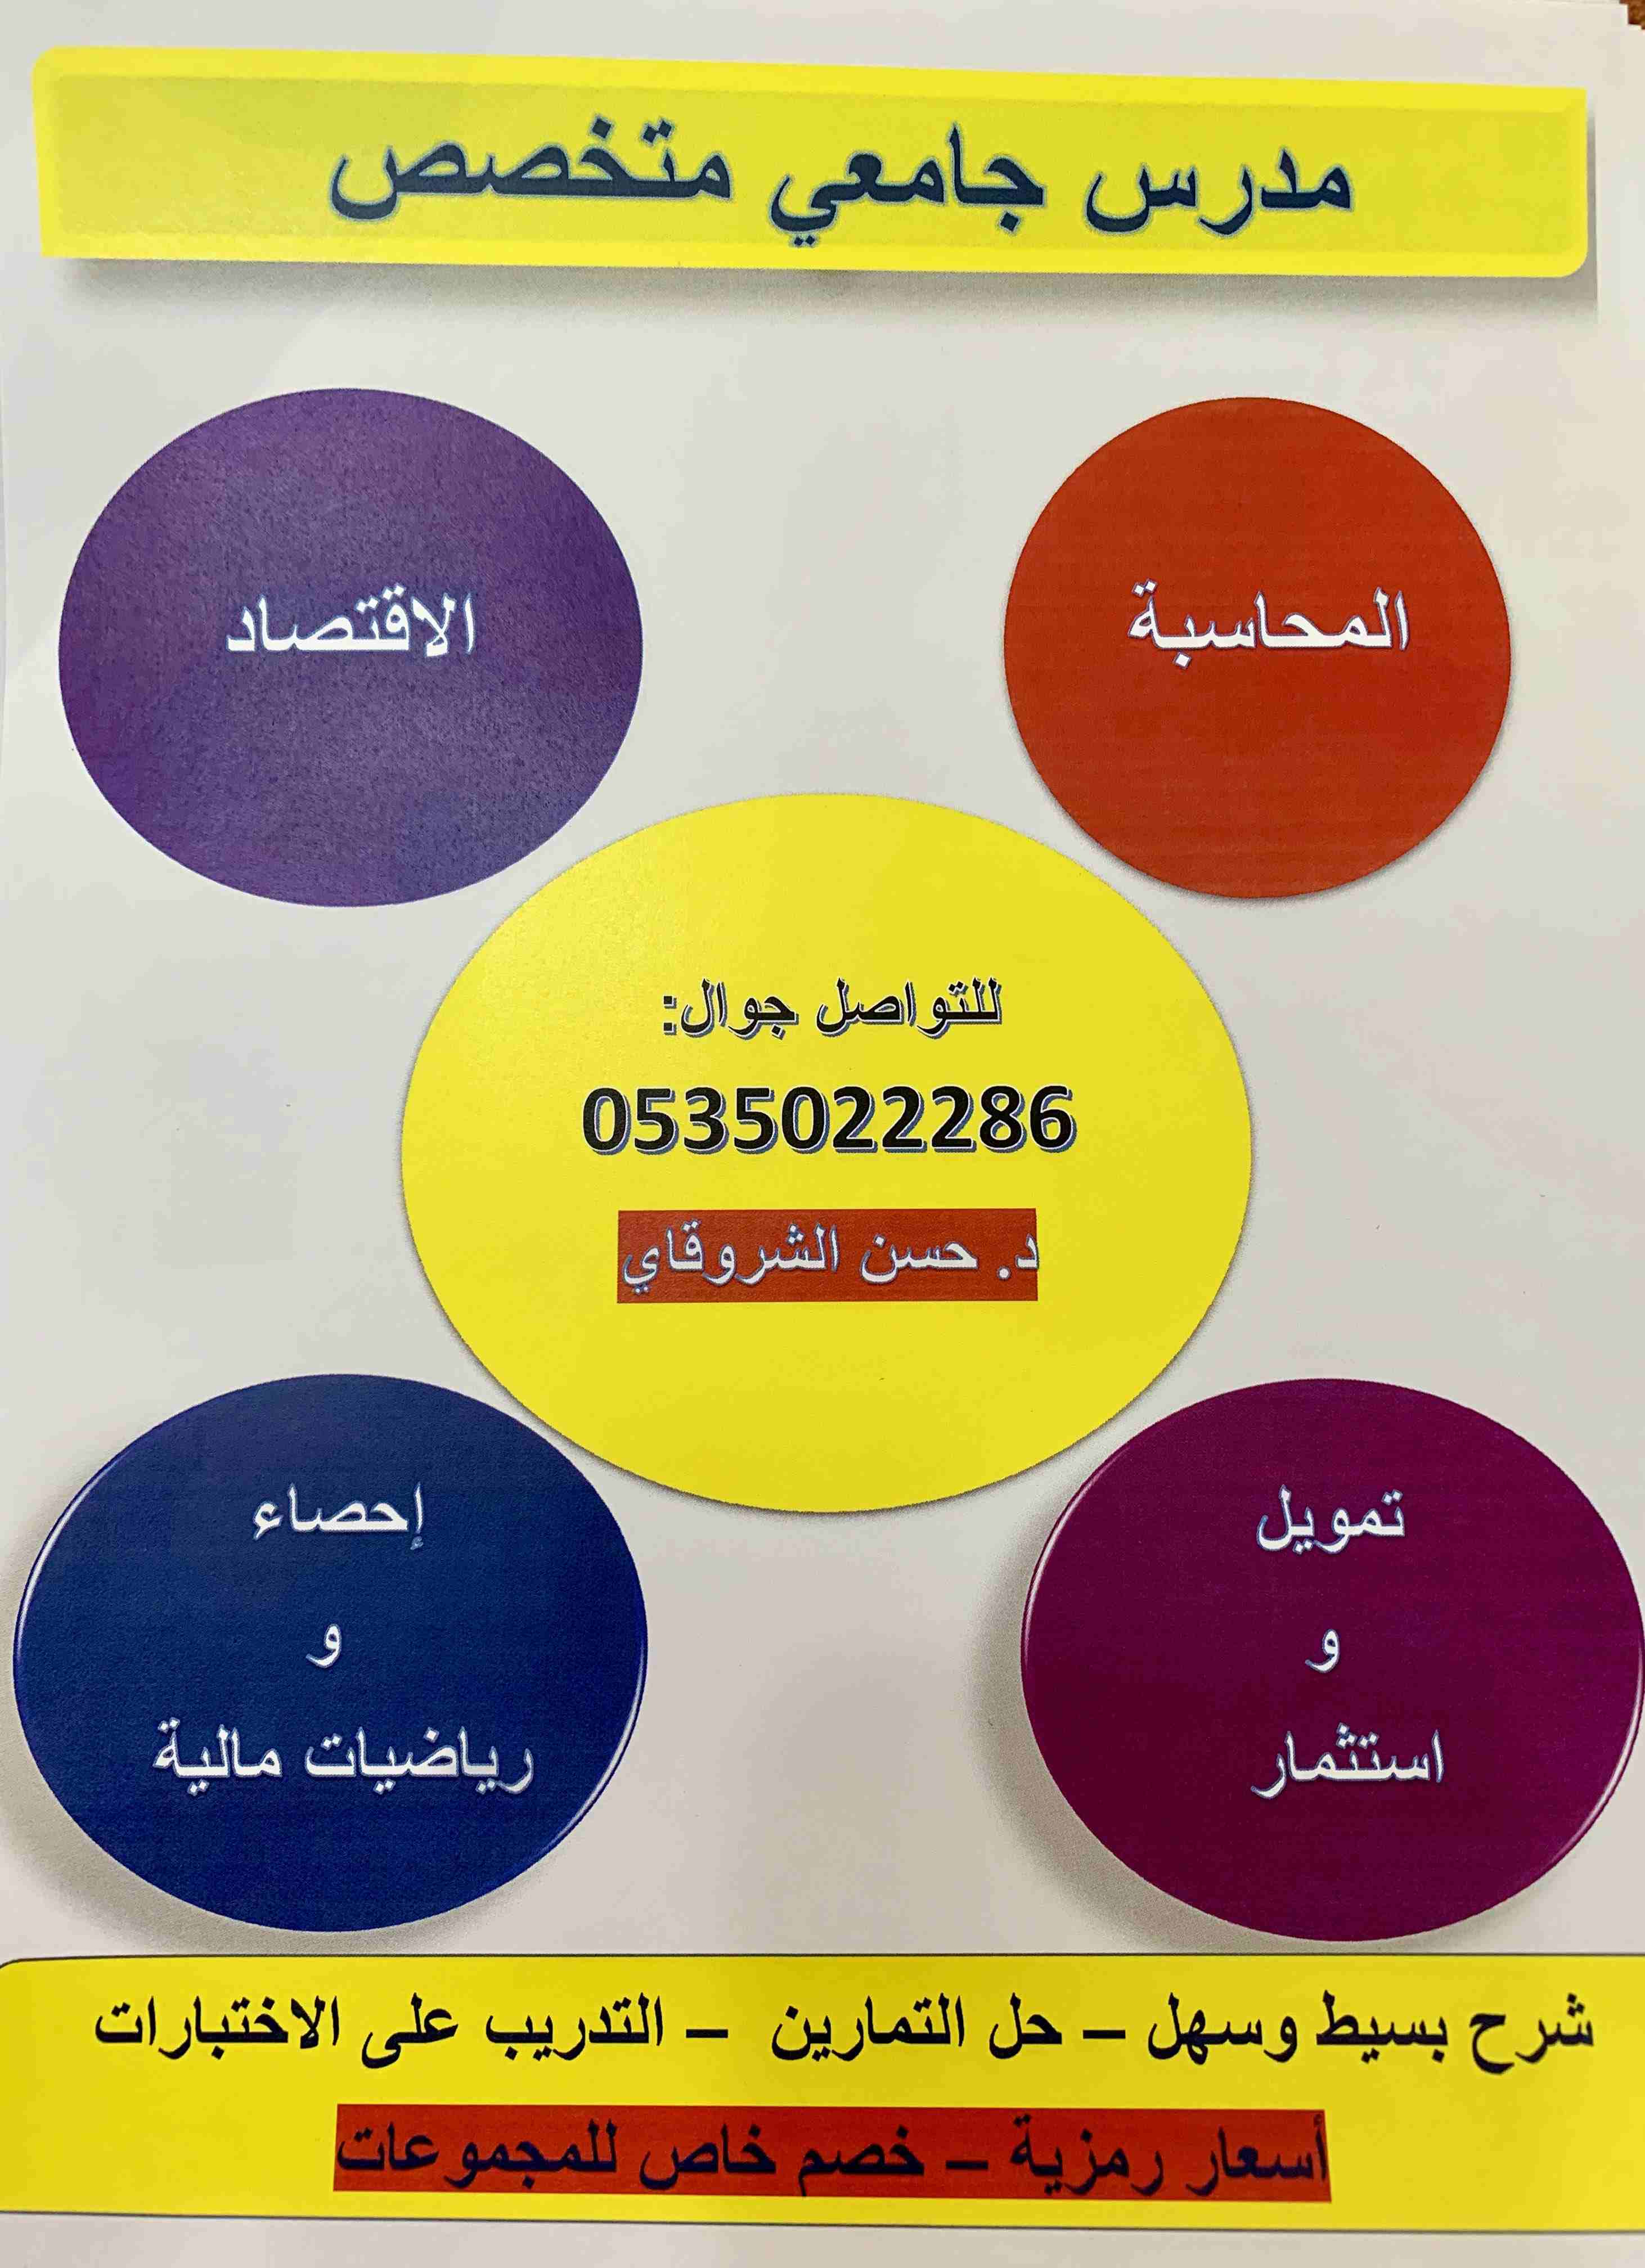 Dear Customers,We invite you all to participate in our new business and project funding program, We are currently funding for Business start-up Business develop-  دروس خصوصيه في المحاسبة...